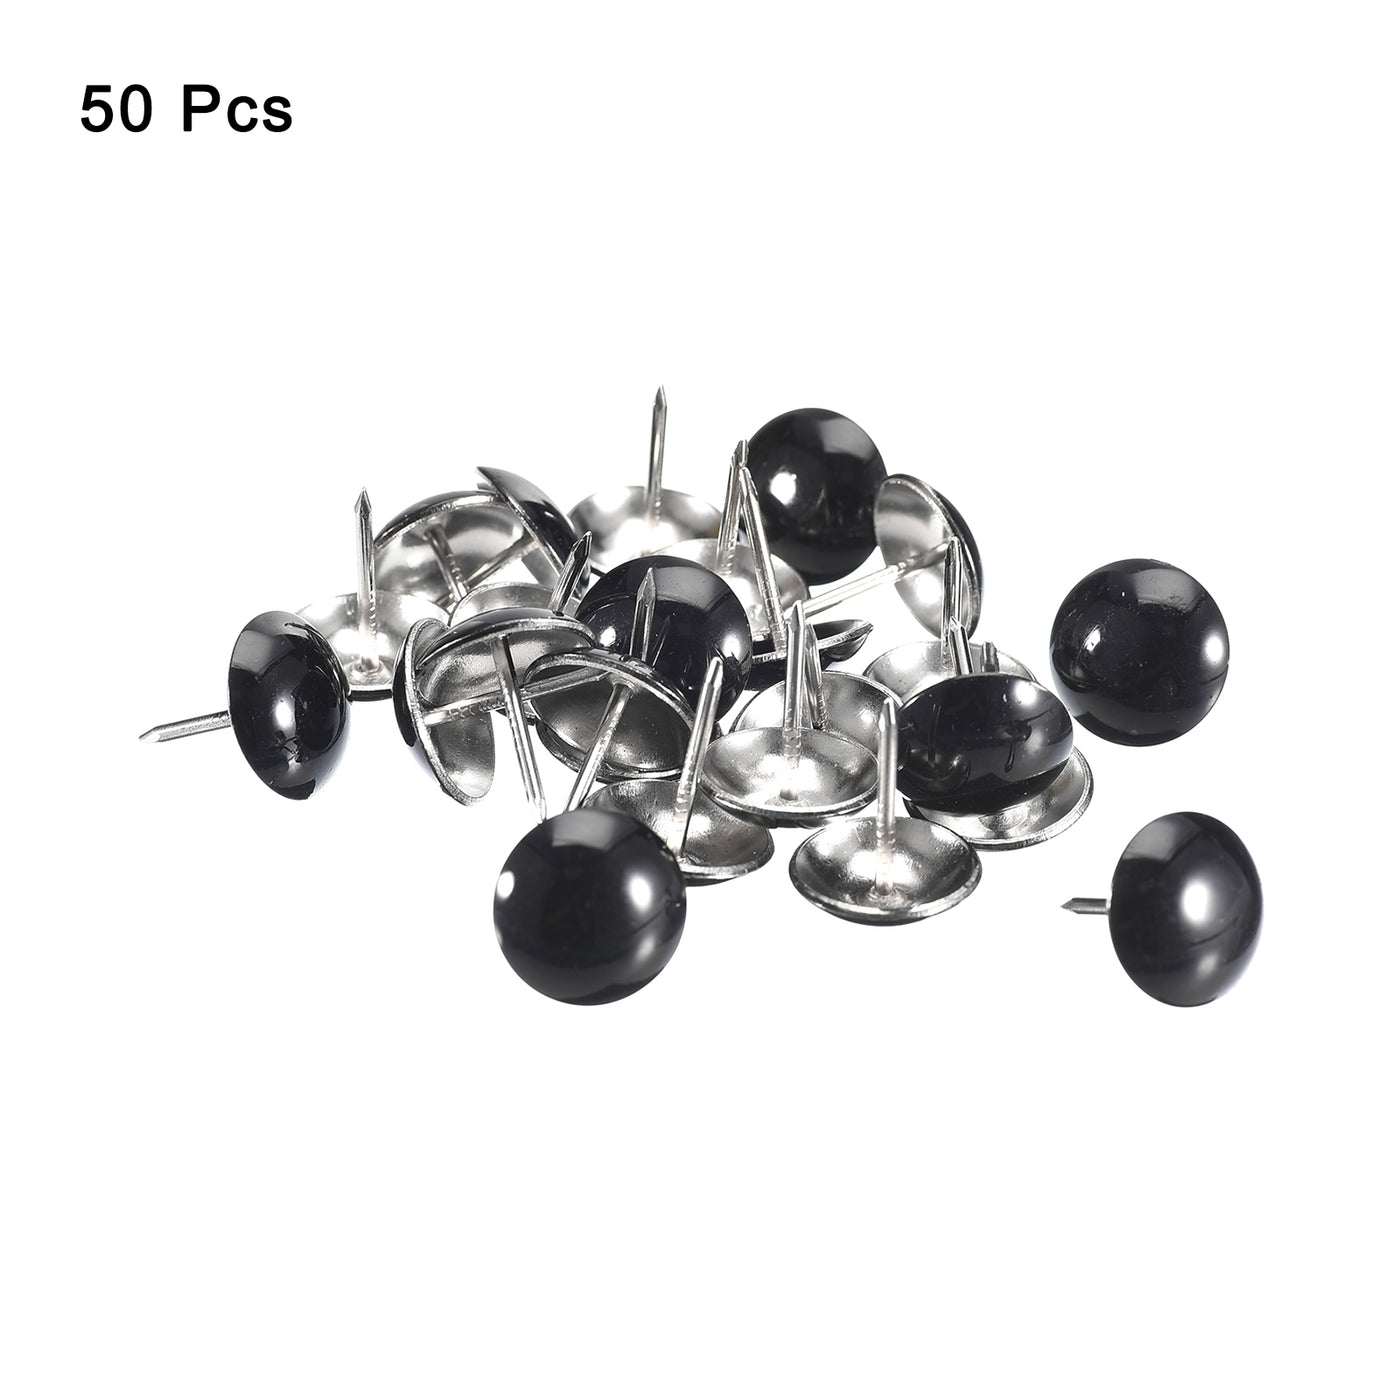 uxcell Uxcell 50Pcs 19mmx22mm Round Decorative Upholstery Tacks Furniture Nails, Bright Black